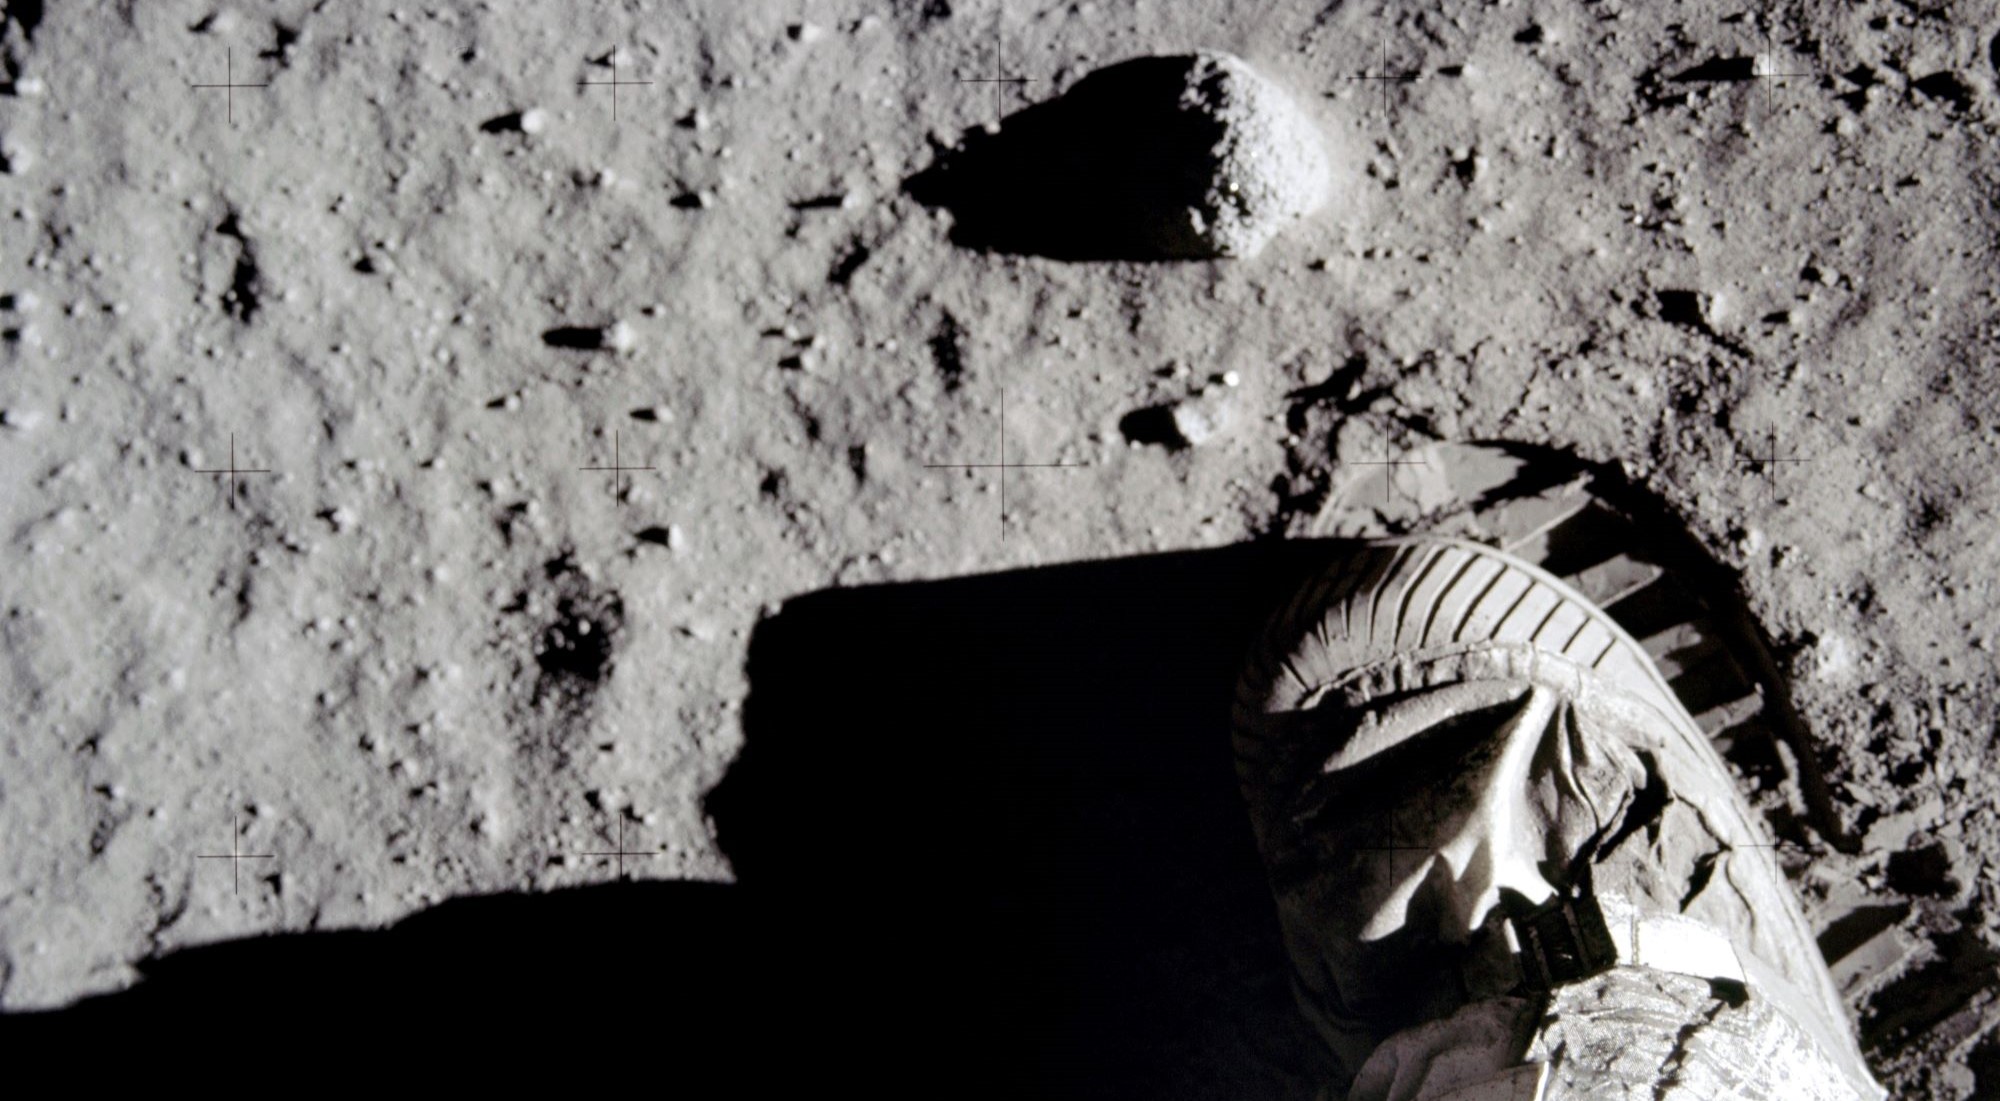 Apollo 11 commander Neil Armstrong leaves a boot print in dusty surface of the moon.